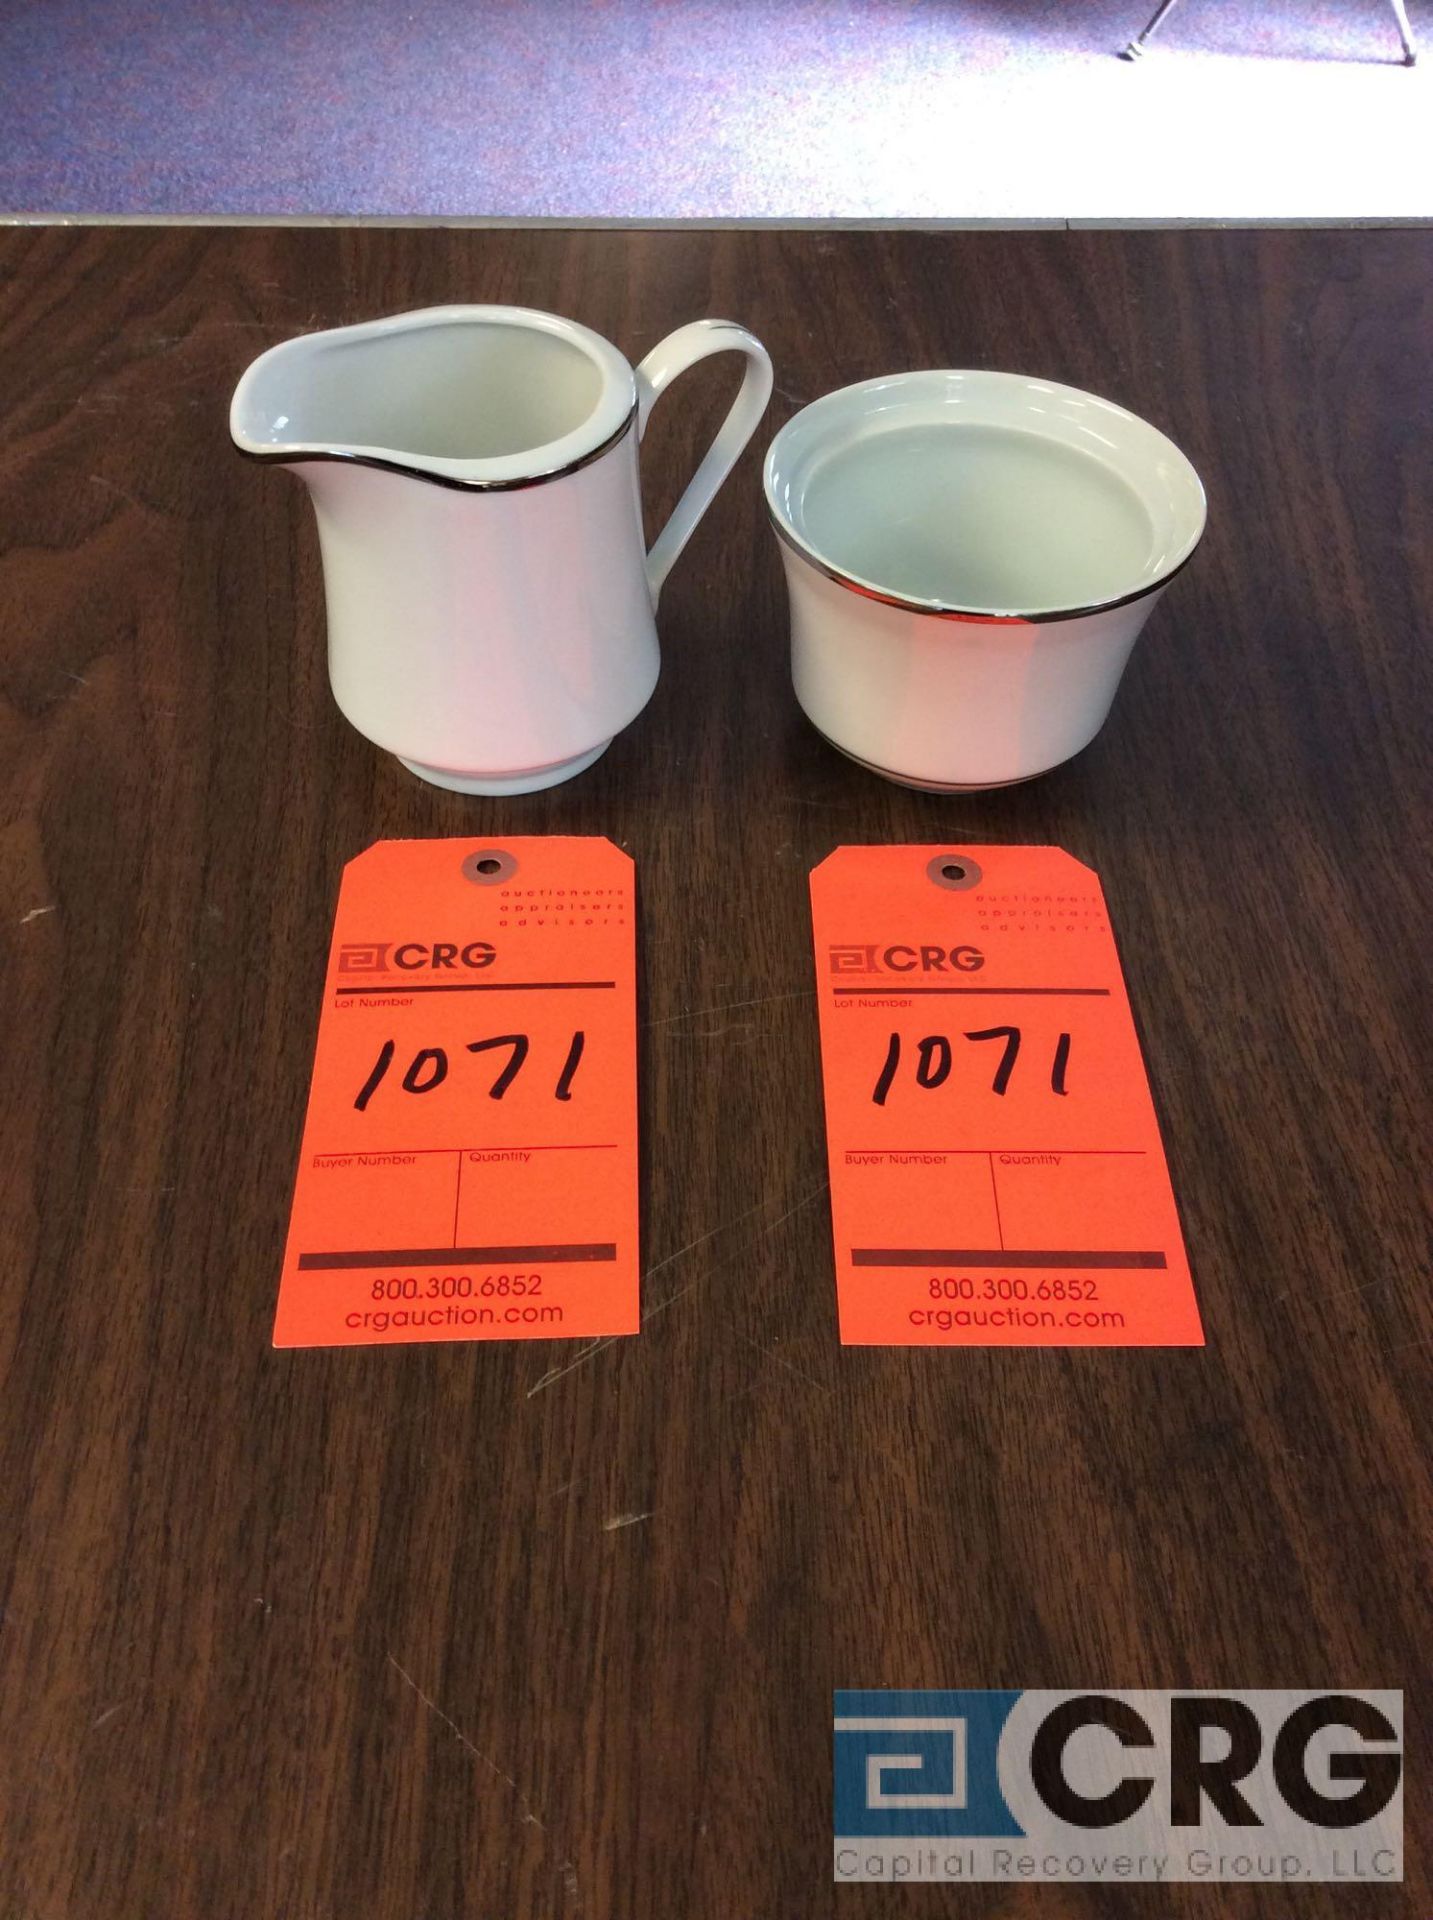 Lot of Schmidt (white and platinum band) (98) creamers and (171) sugar bowls - SUBJECT TO ENTIRETY